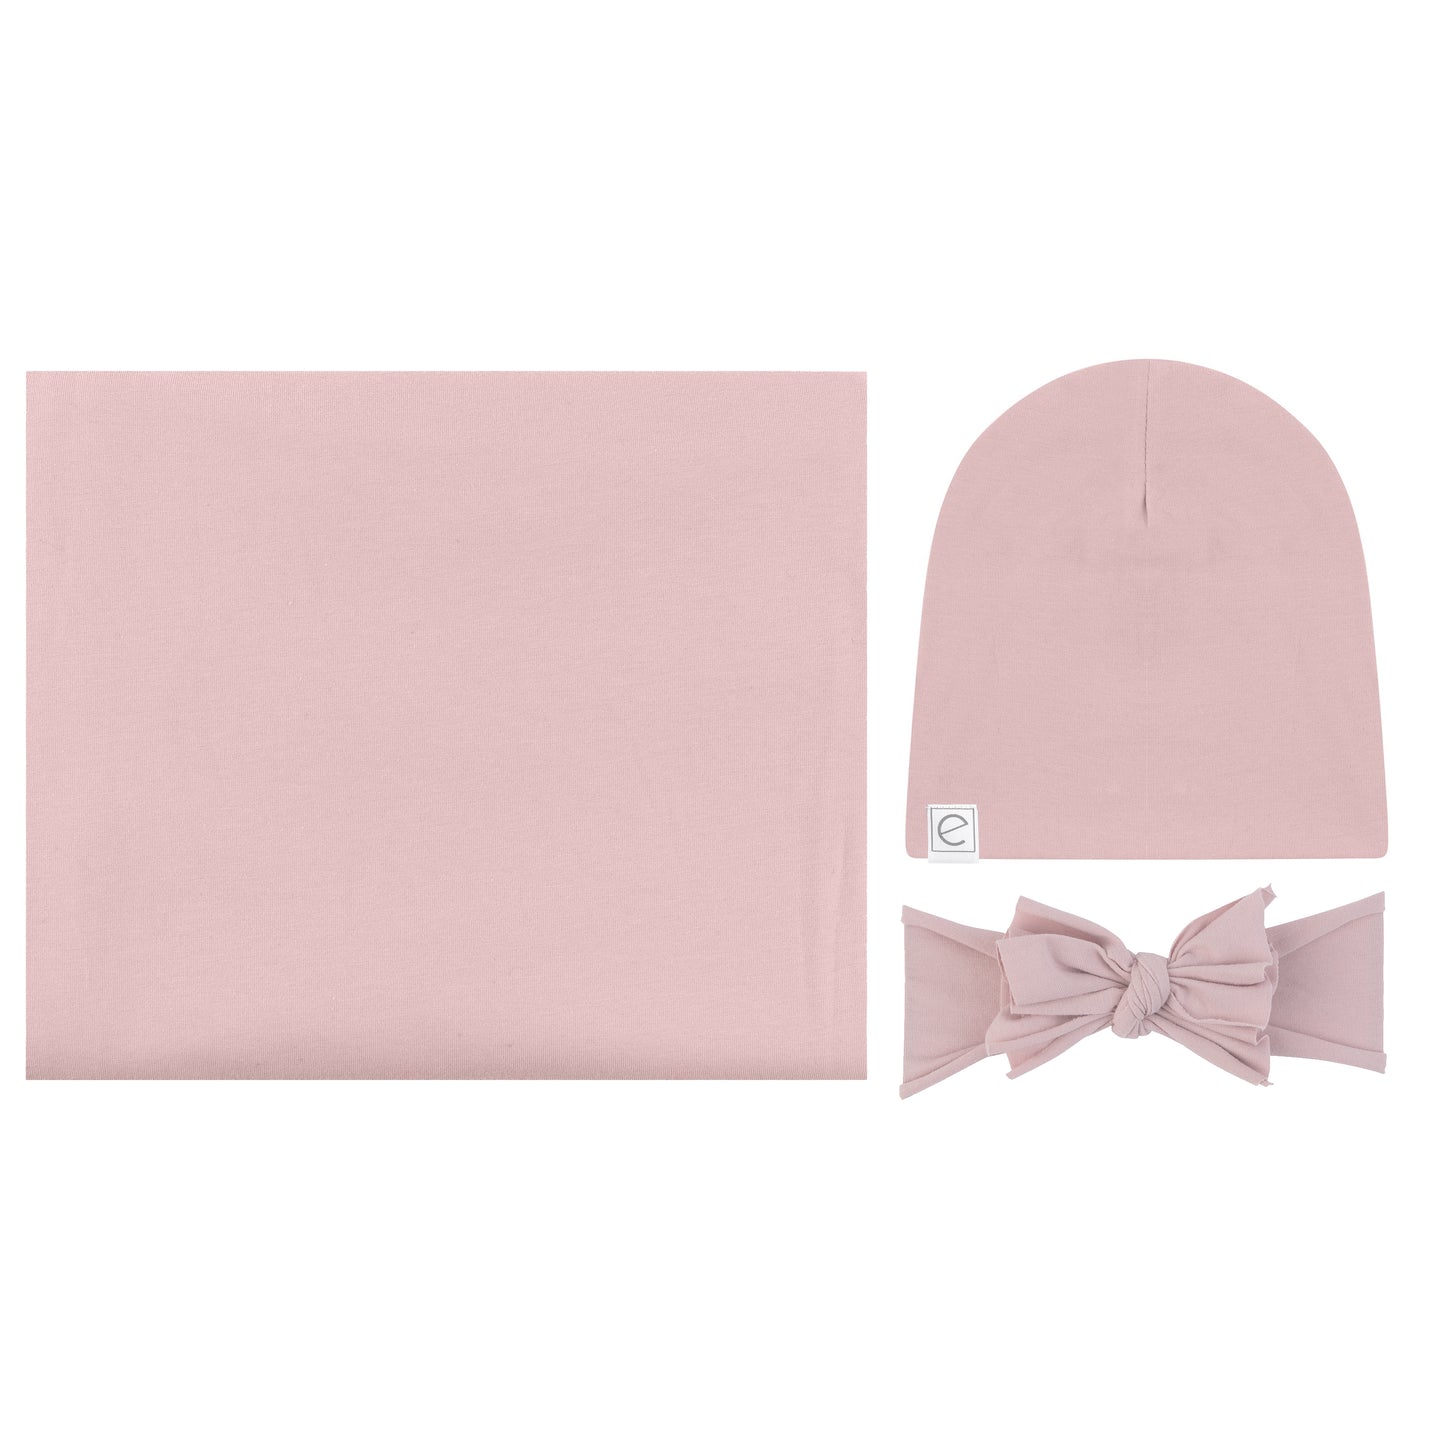 Ely's & Co. Cotton Spandex Swaddle Set (Includes a matching hat & Headband)